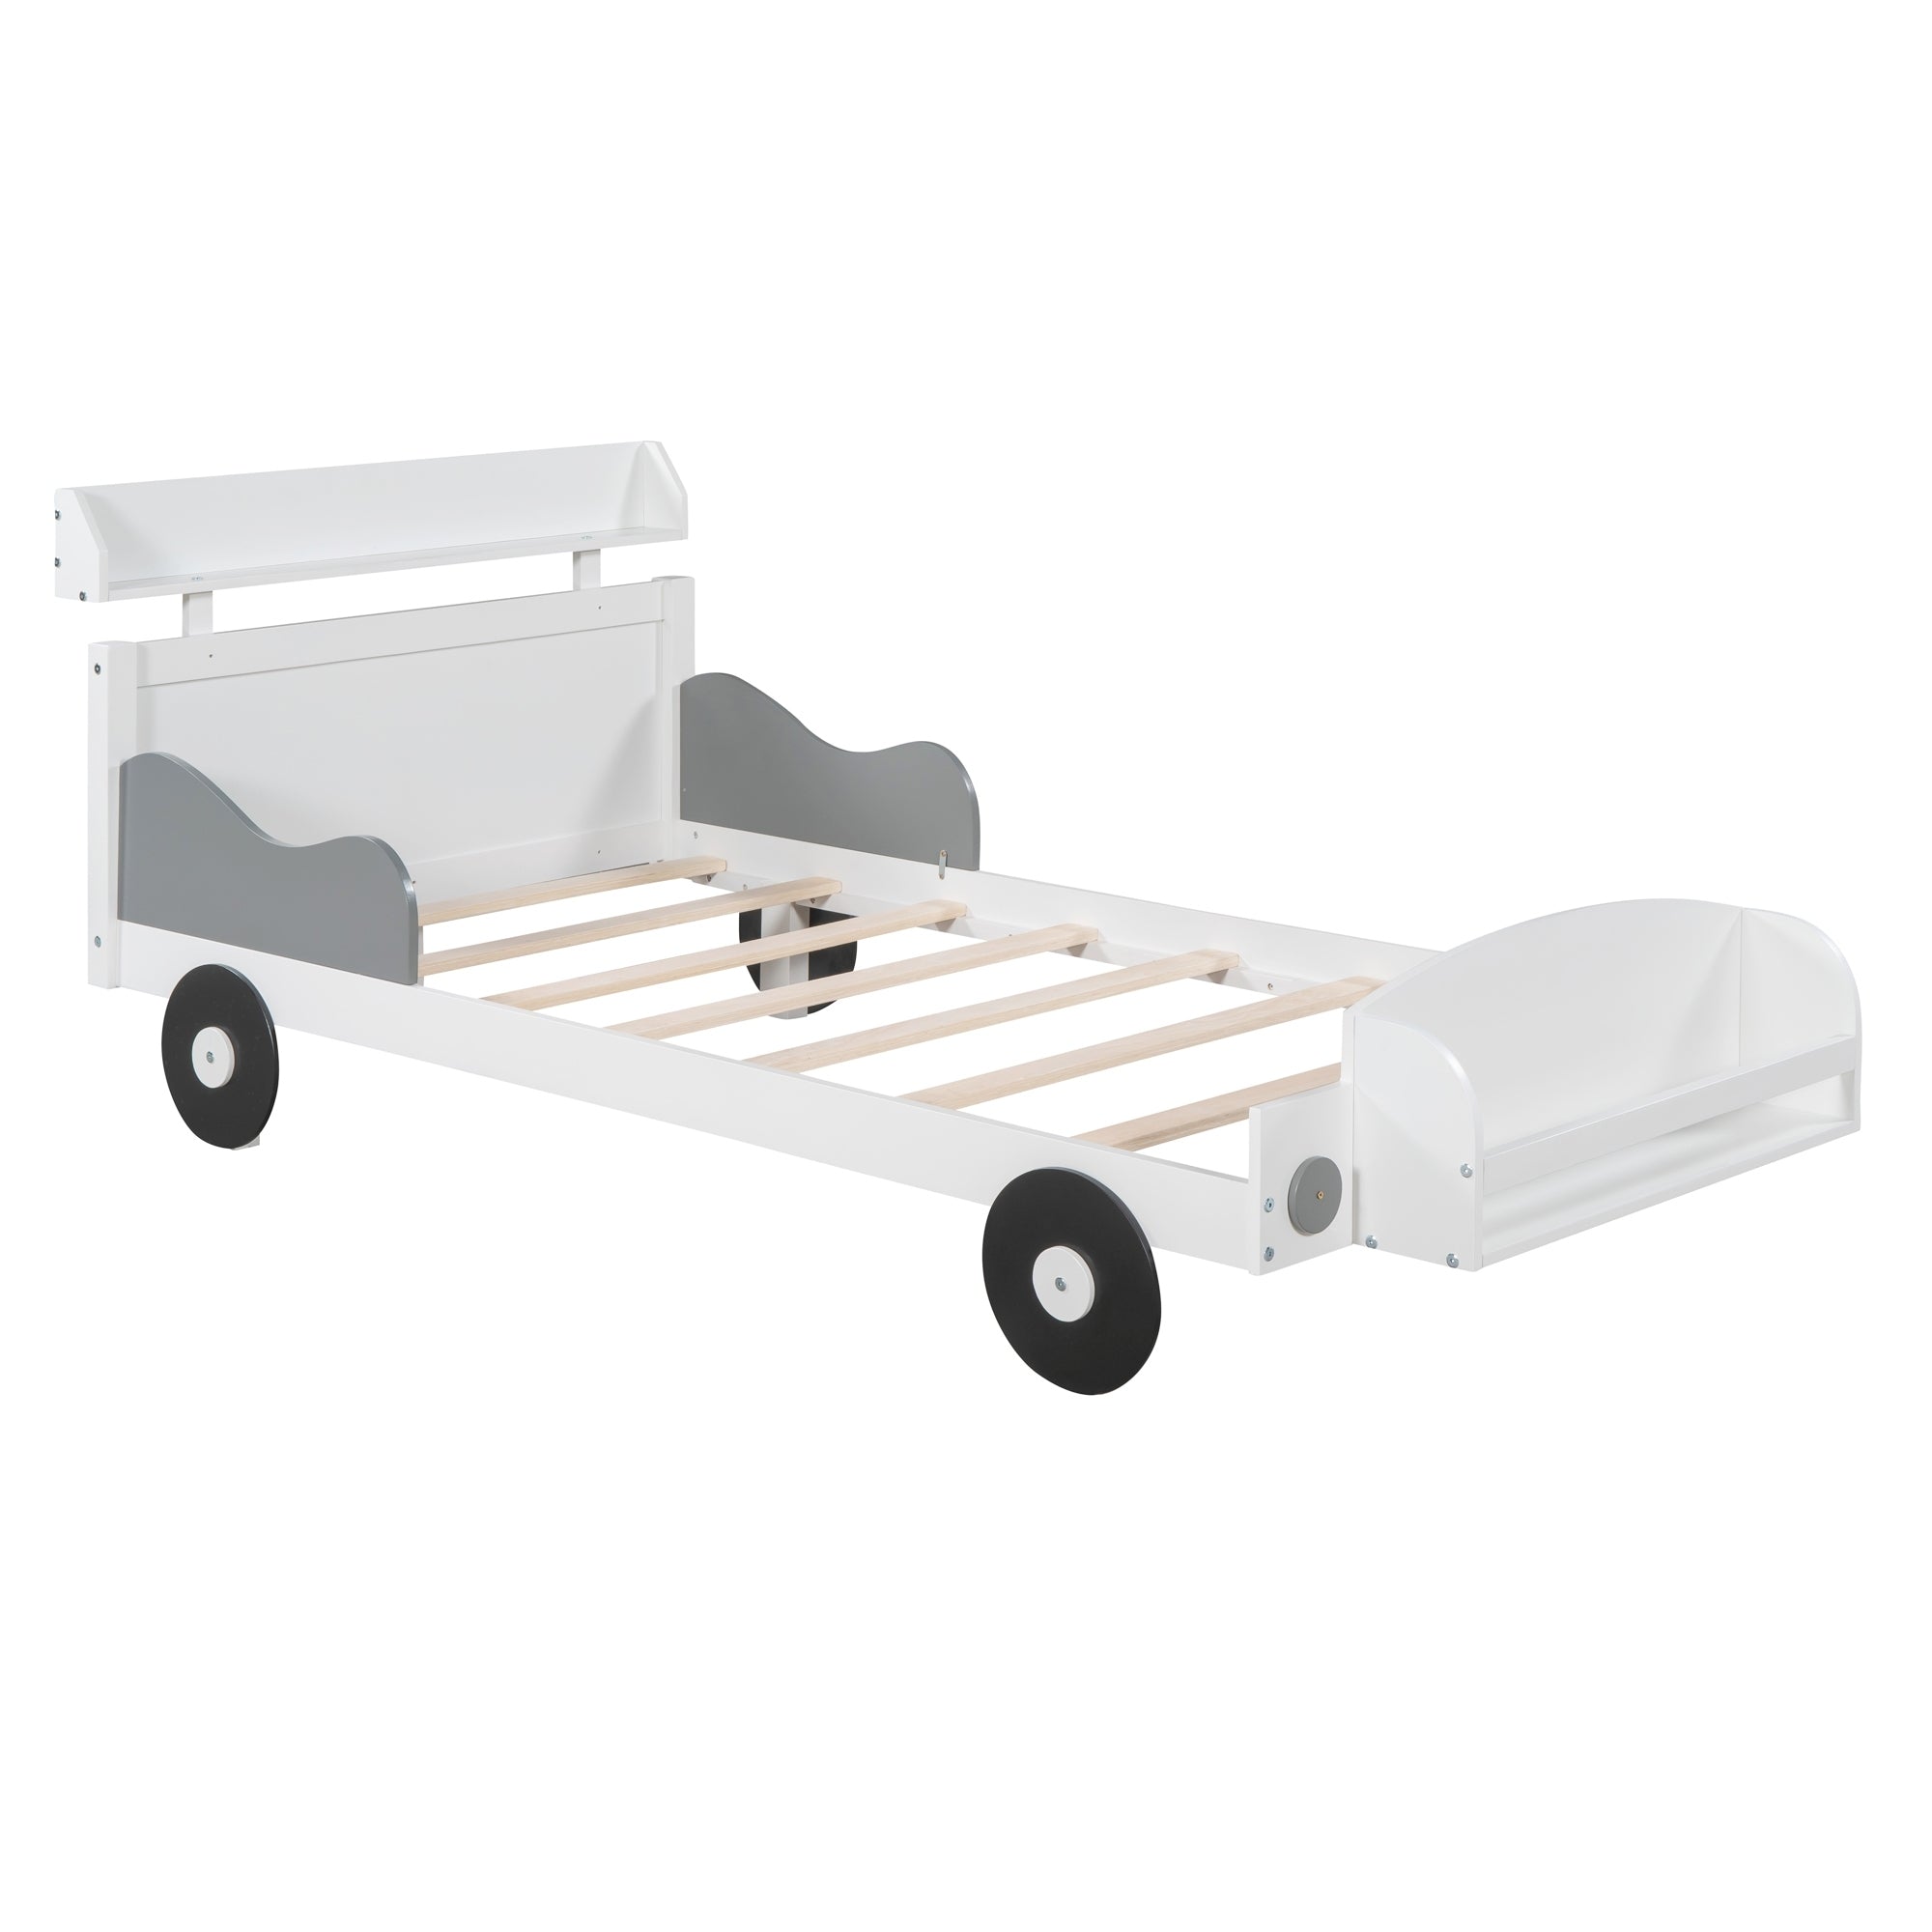 Twin Size Car Shaped Platform Bed,Twin Bed with white-wood